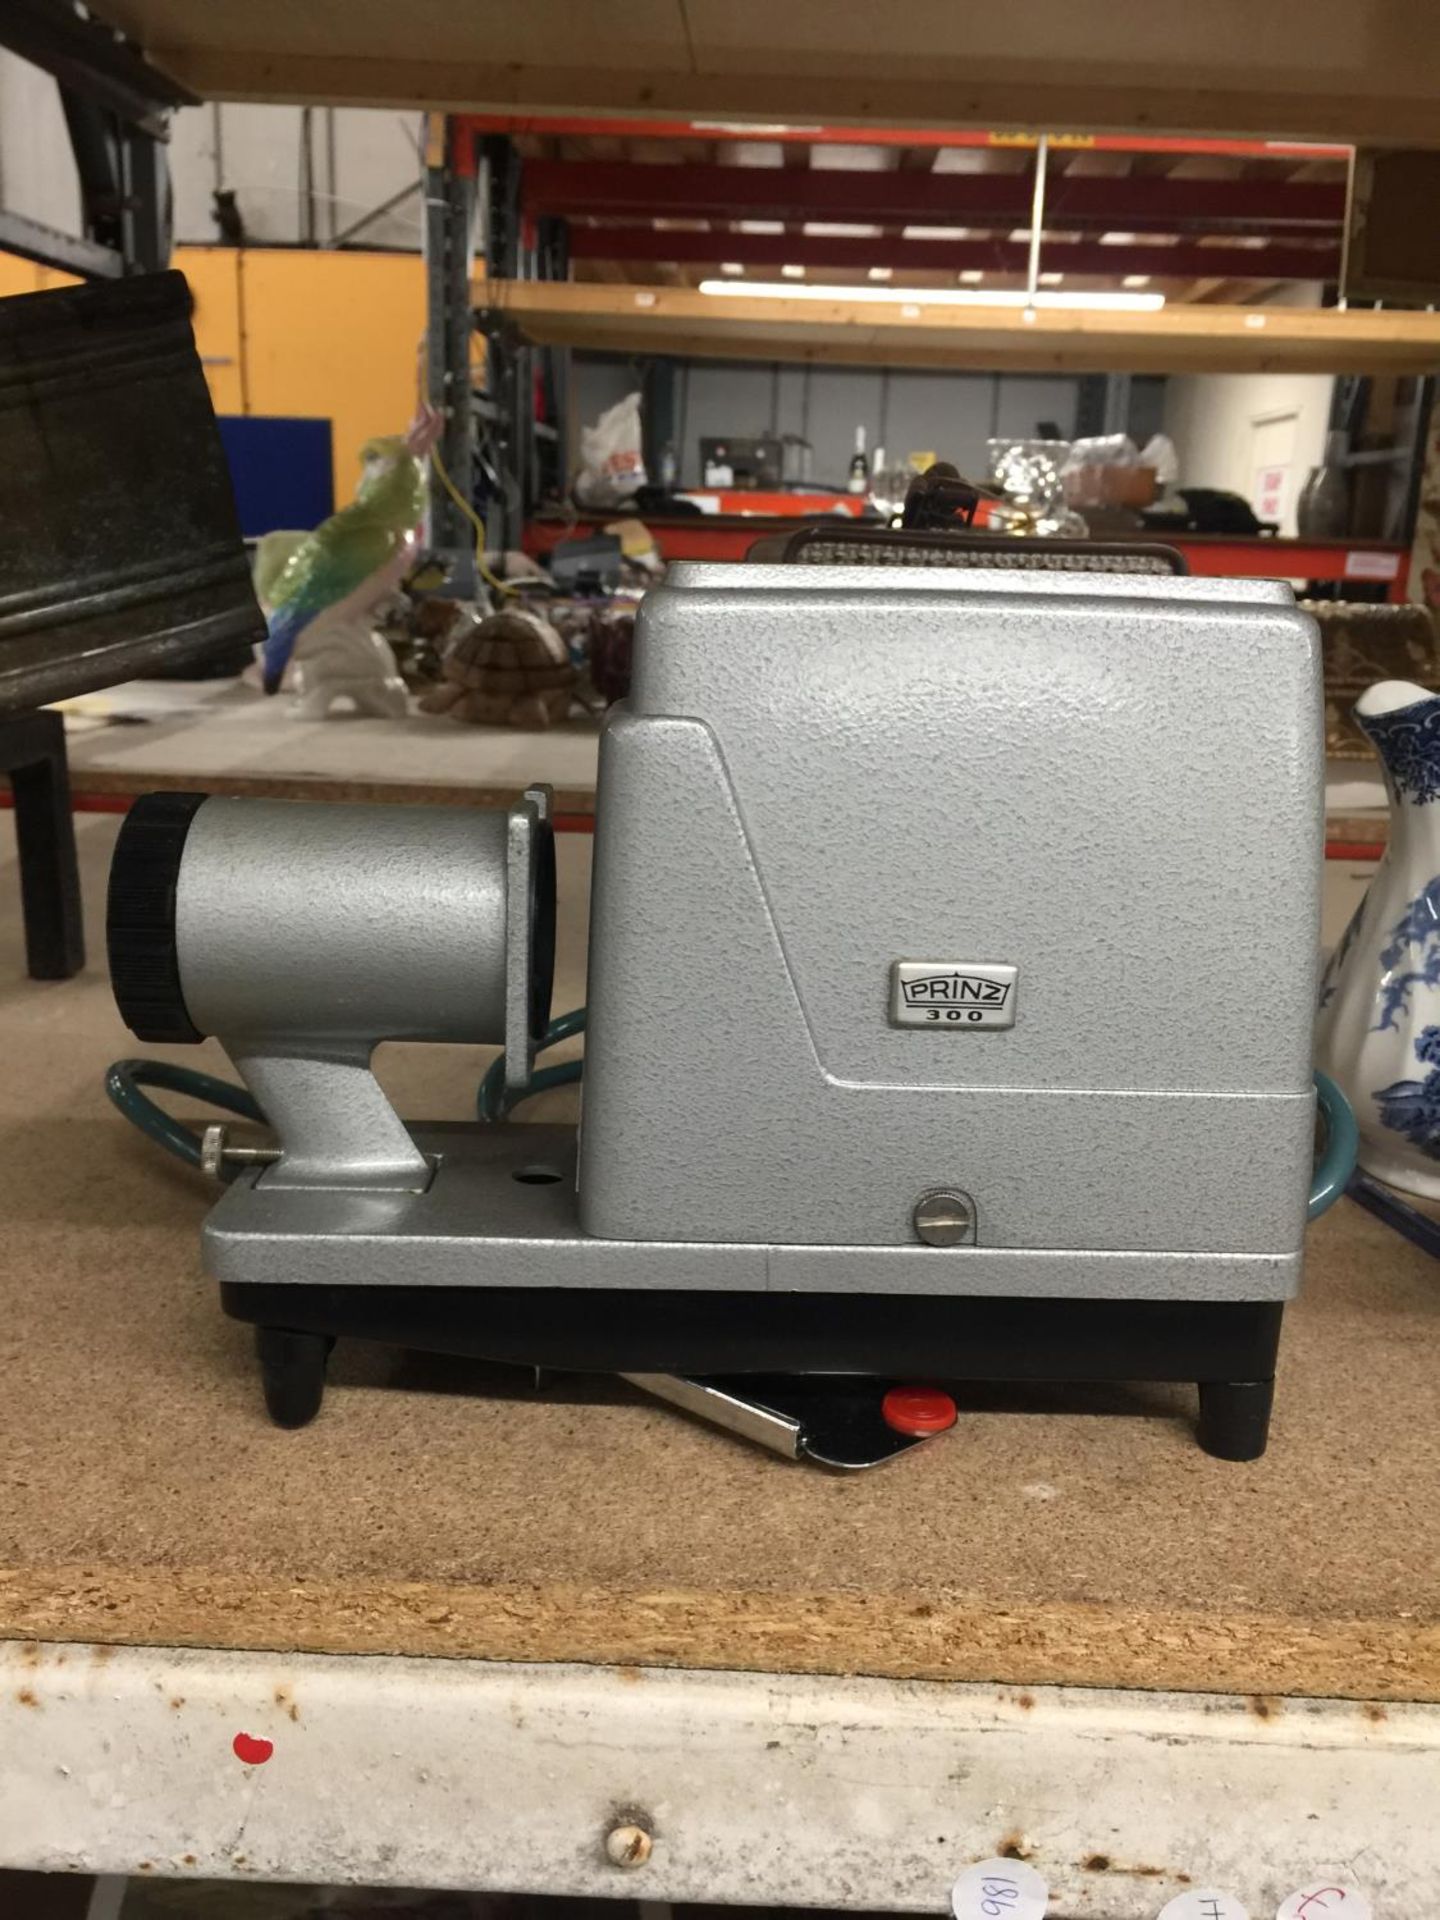 A VINTAGE PRINZ 300 PROJECTOR AND CASE